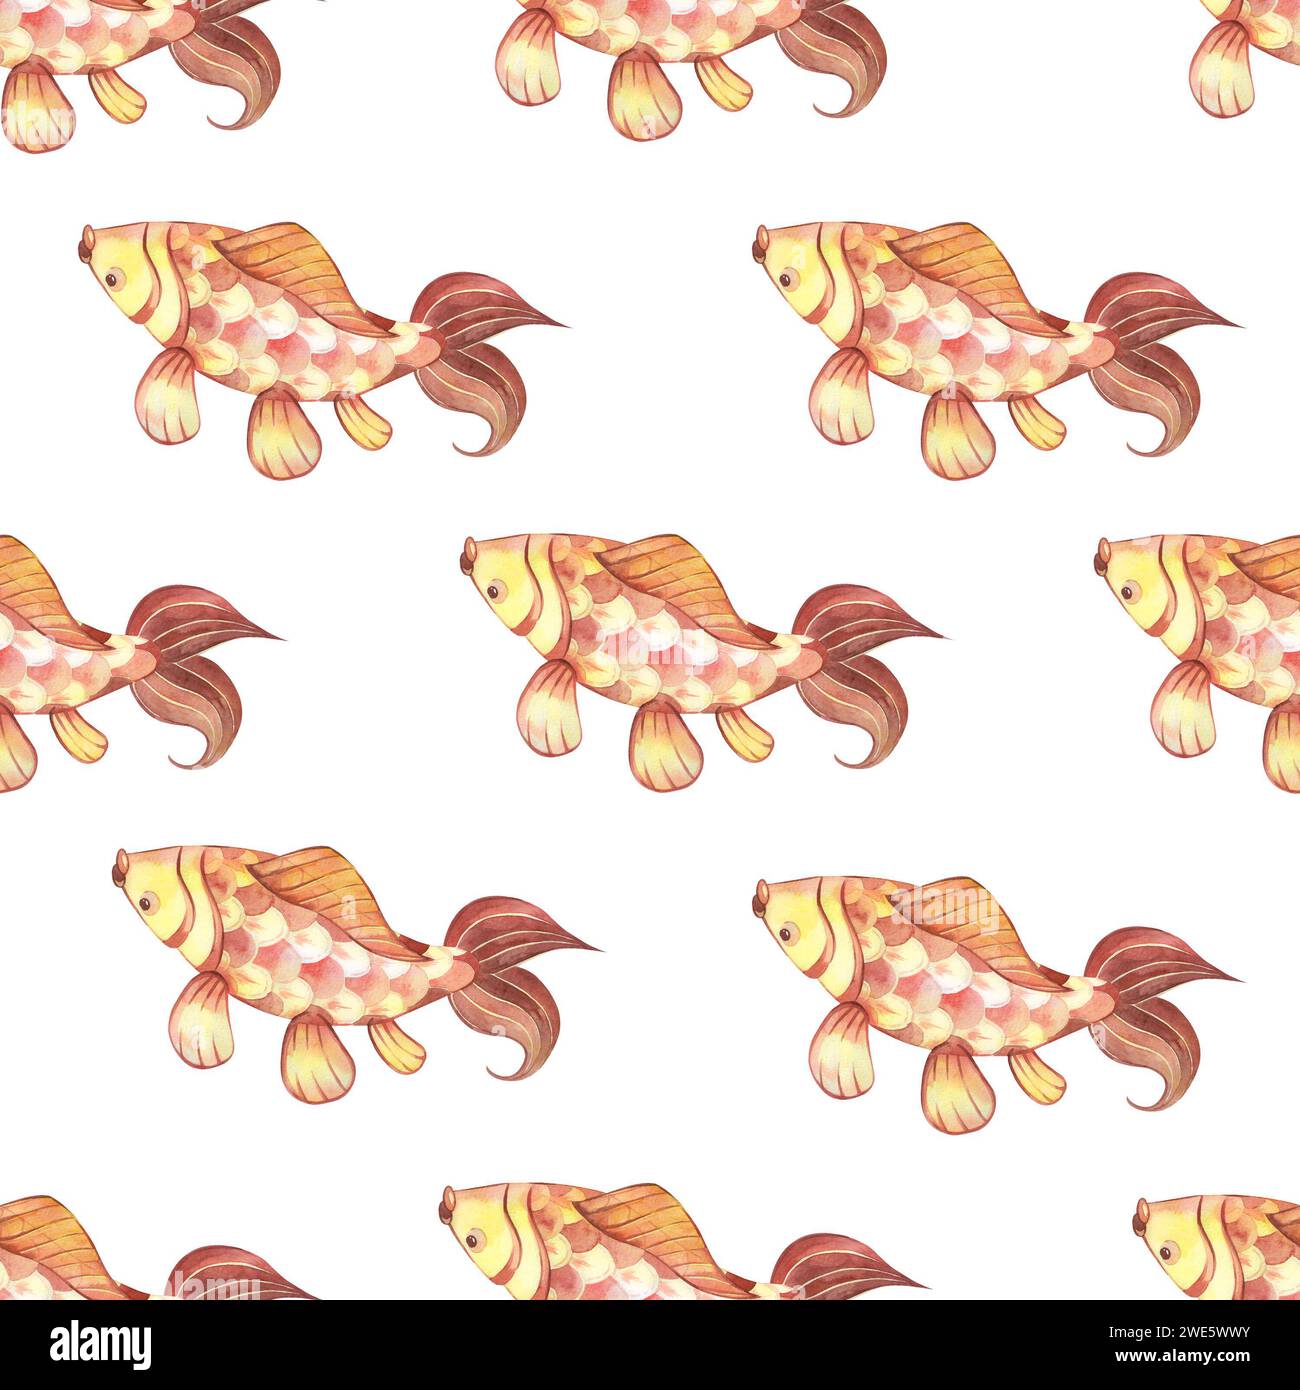 Seamless pattern. Chinese carp are red and yellow in color with large fins on a white background. All elements are hand-painted with watercolors. Stock Photo